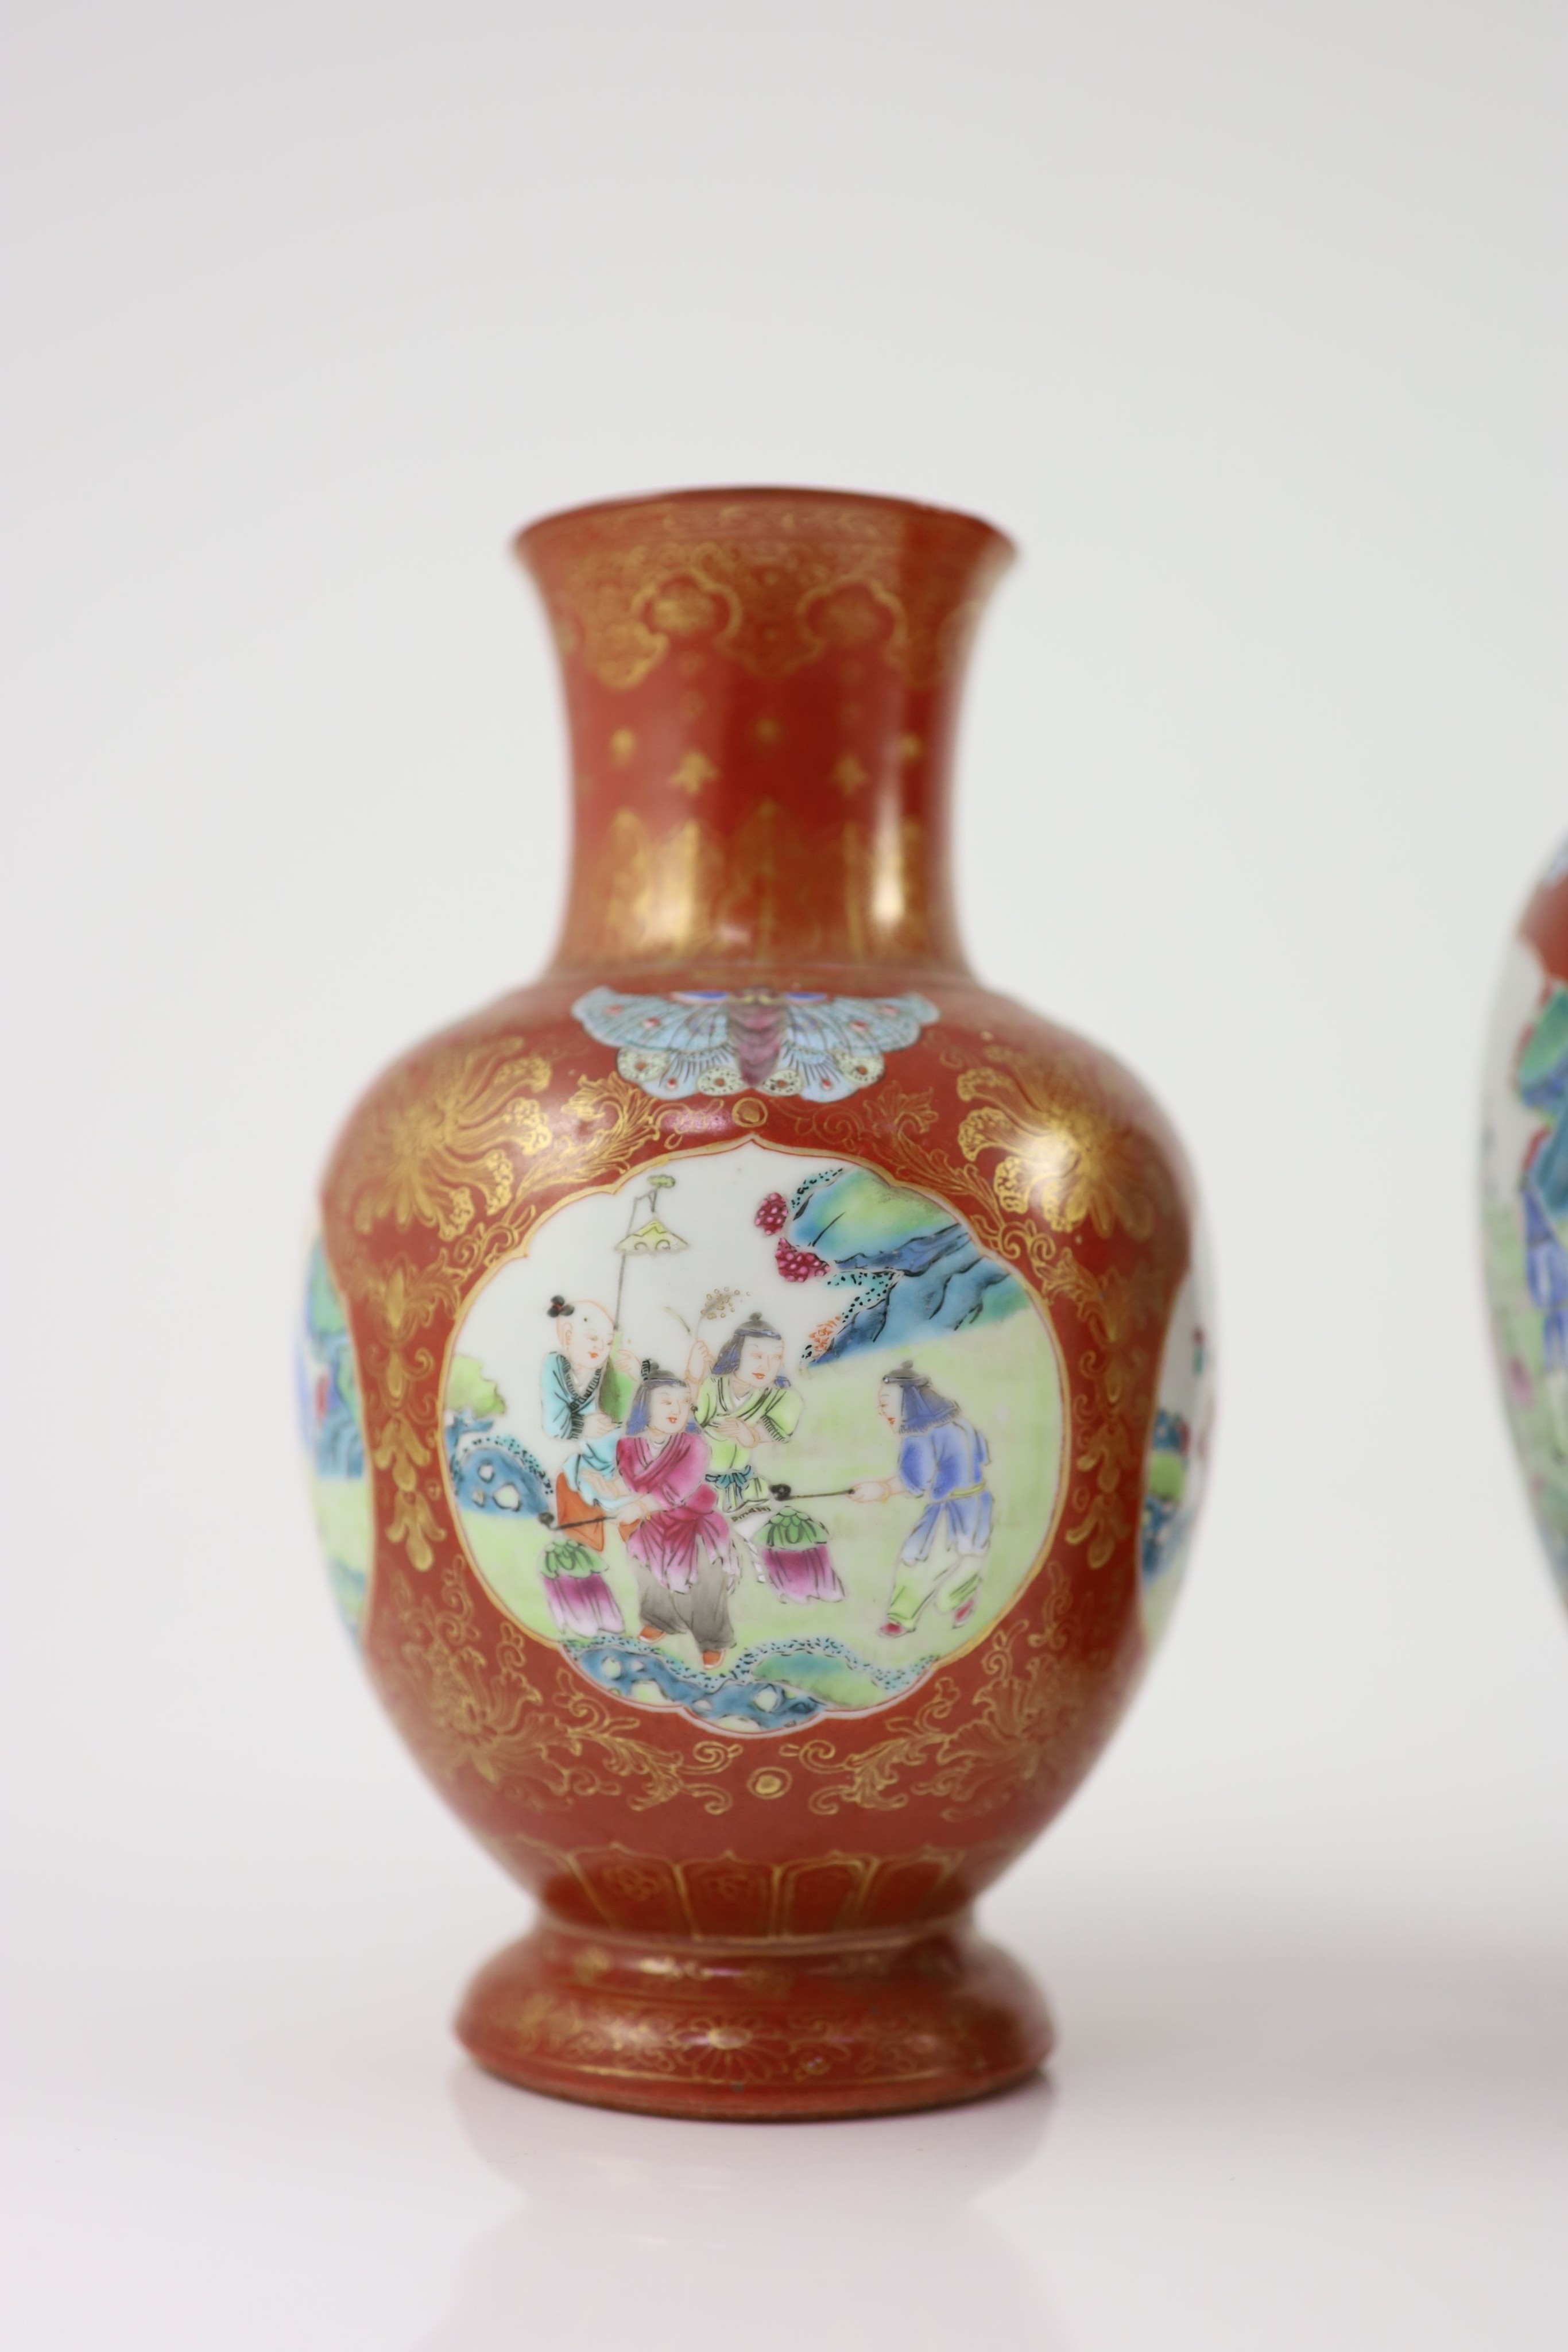 A set of three Chinese coral ground ‘boys’ vases, Jiaqing period (1796-1820), 19.5 and 23.5cm high